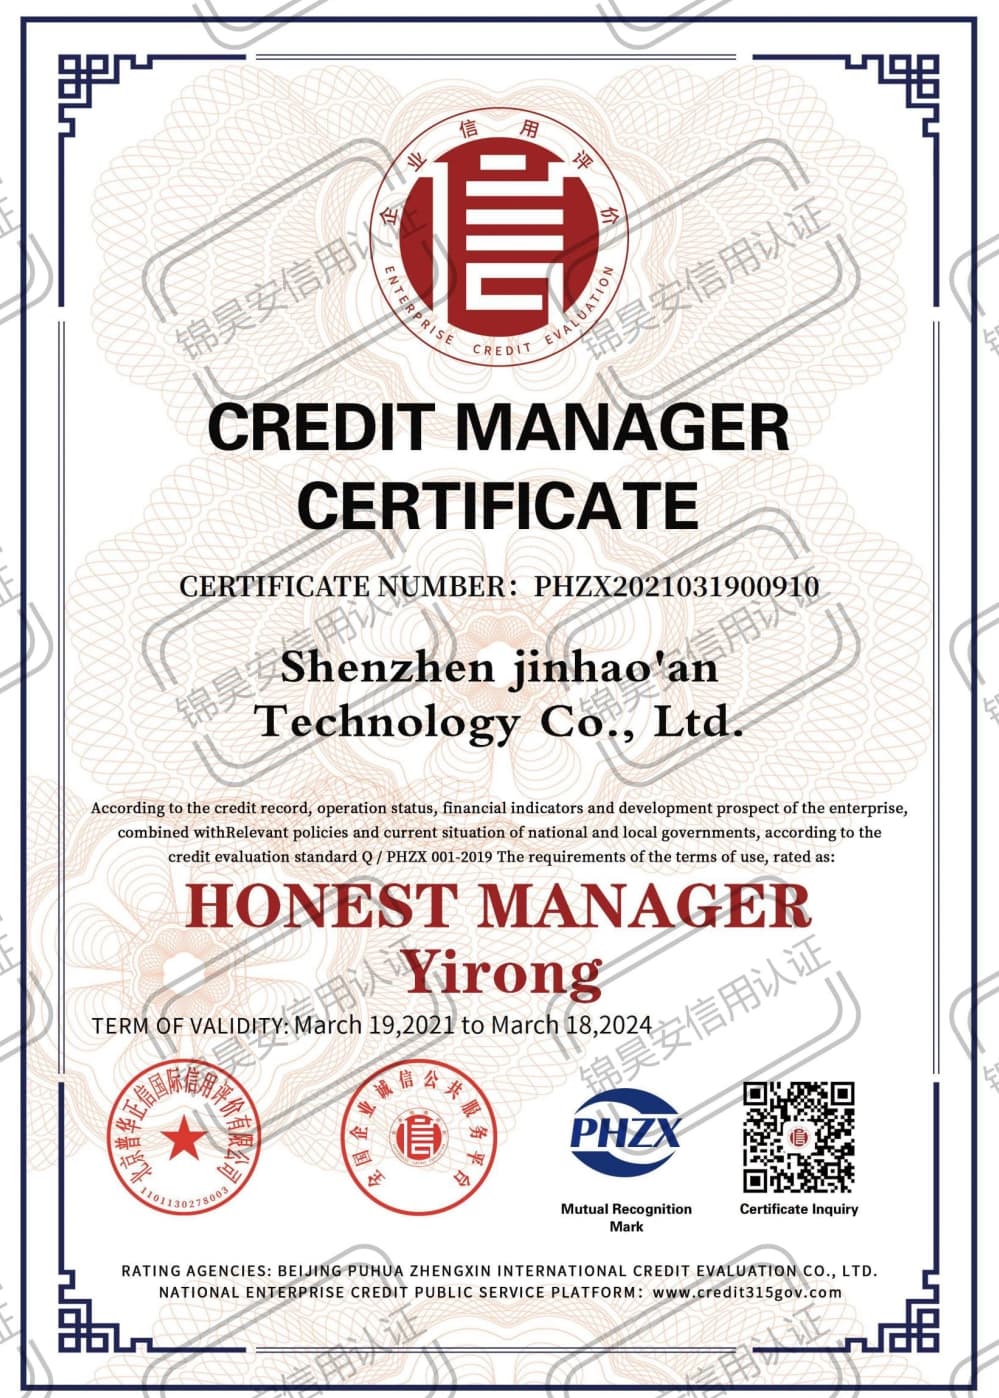 Credit Manager Certificate